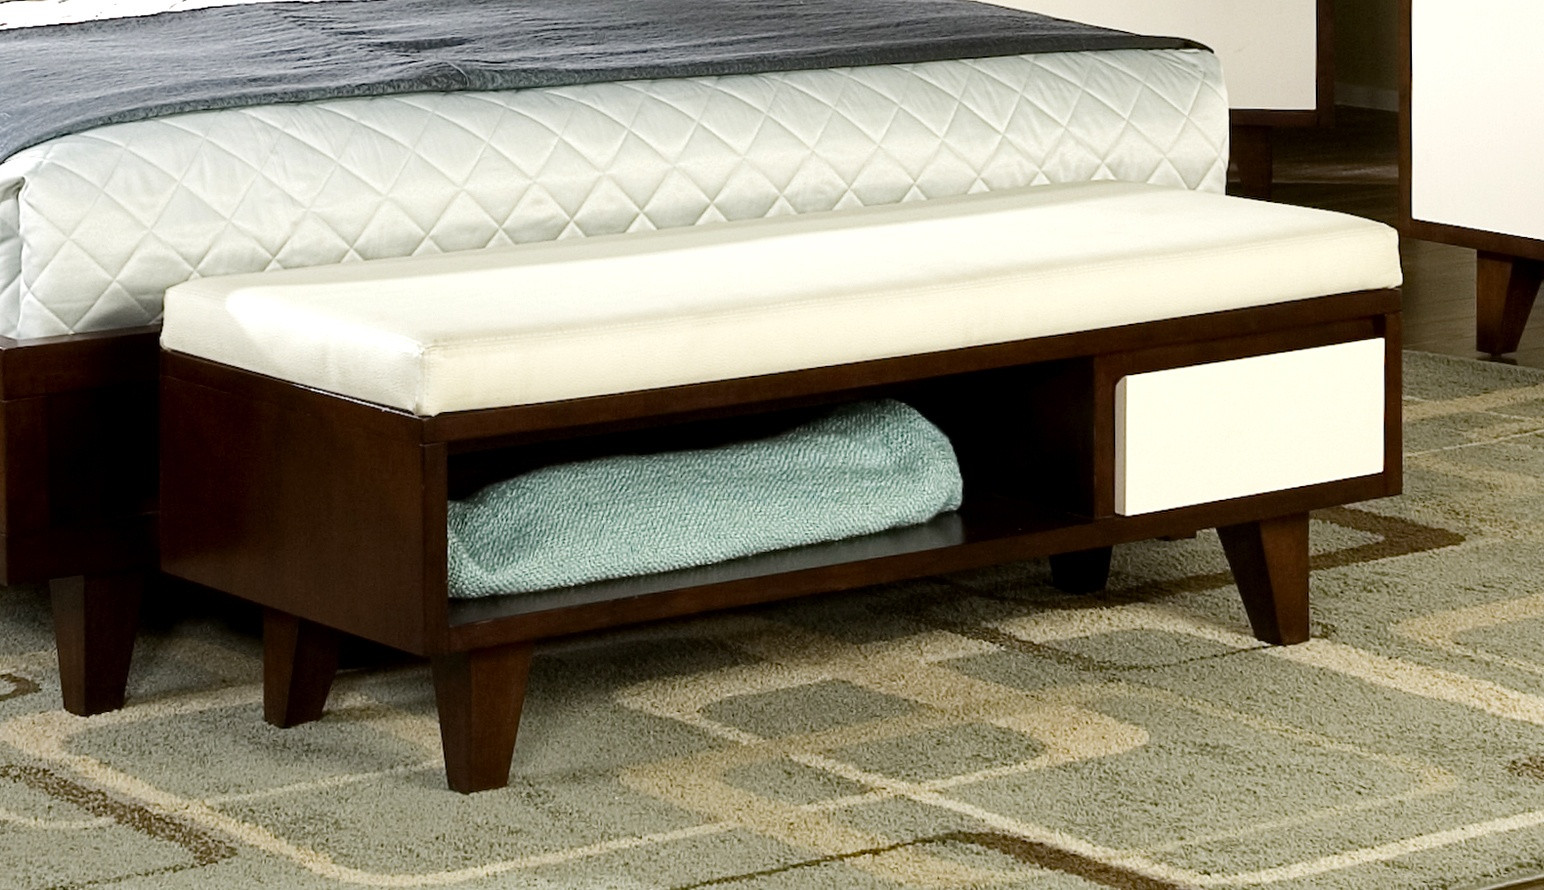 Bed Bench Storage
 Bedroom Benches with Storage Ideas – HomesFeed